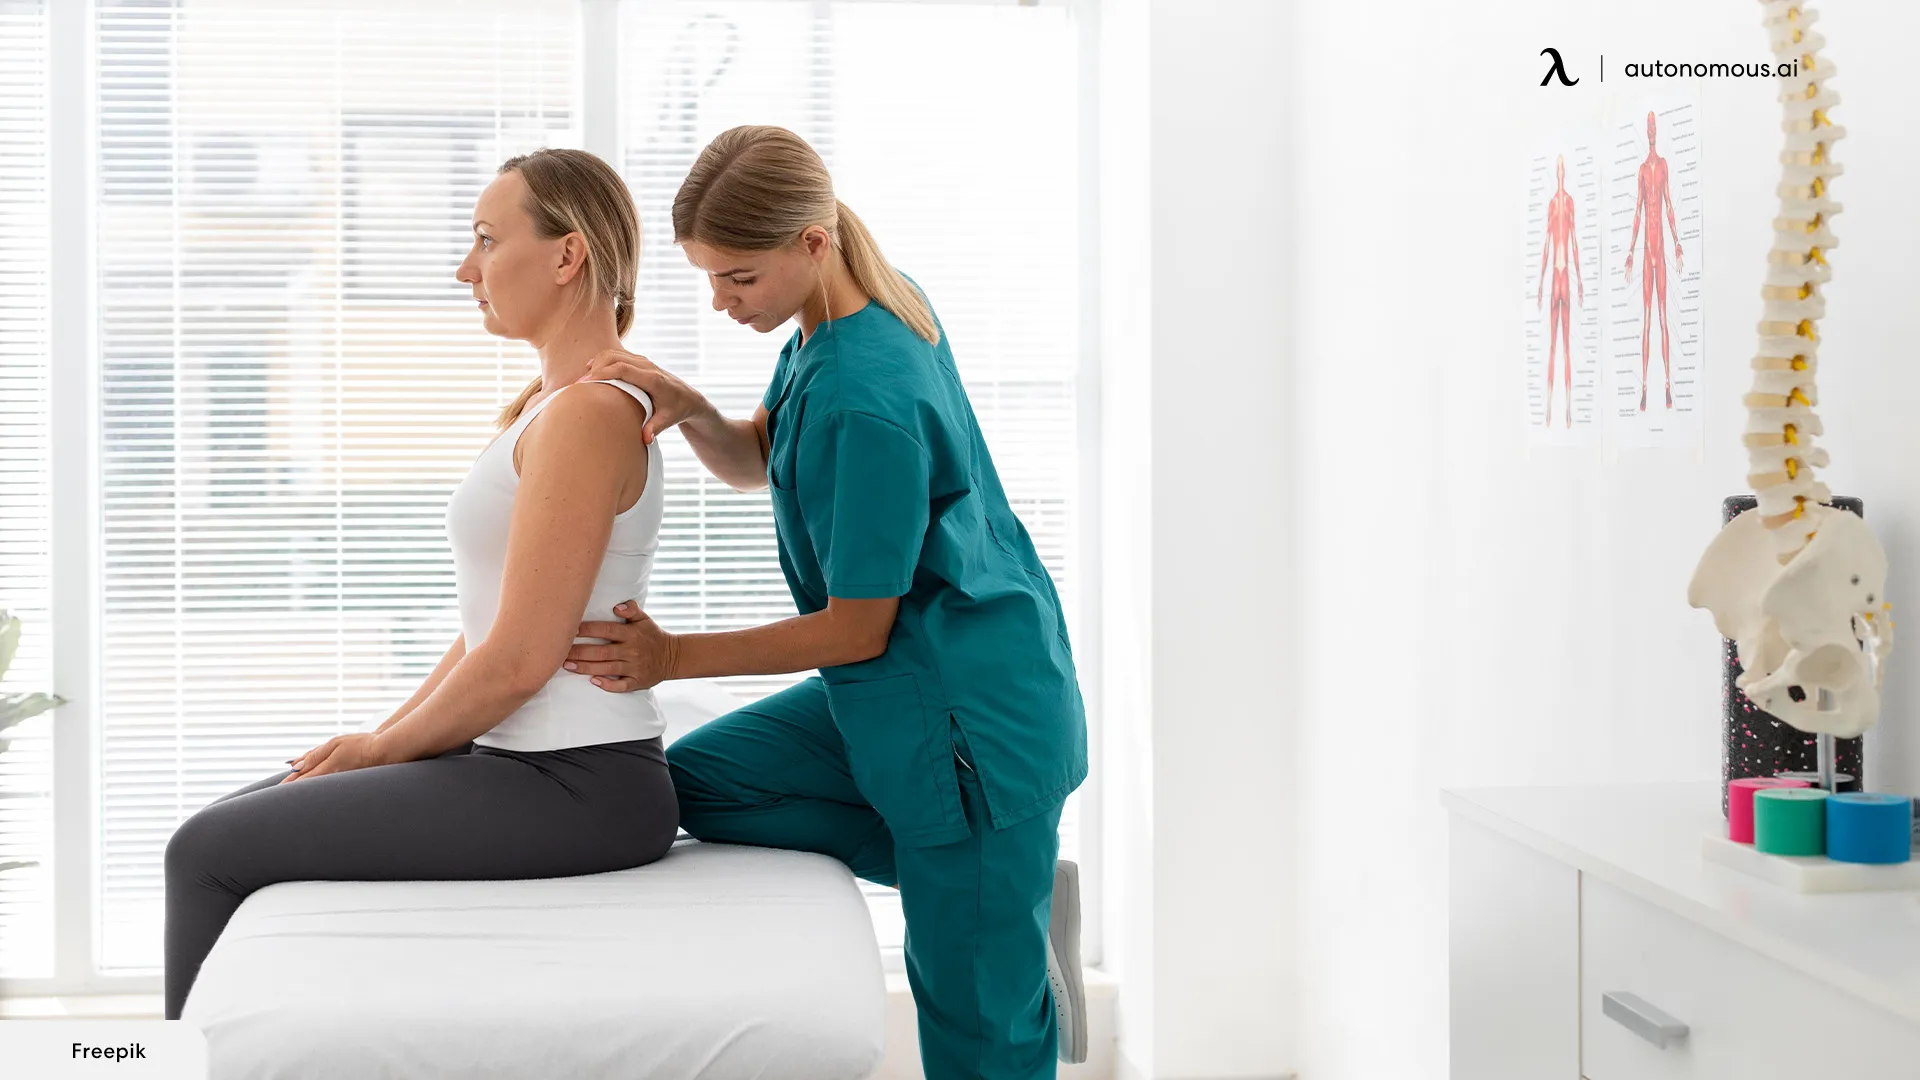 When and Why is Chiropractic Care Important?